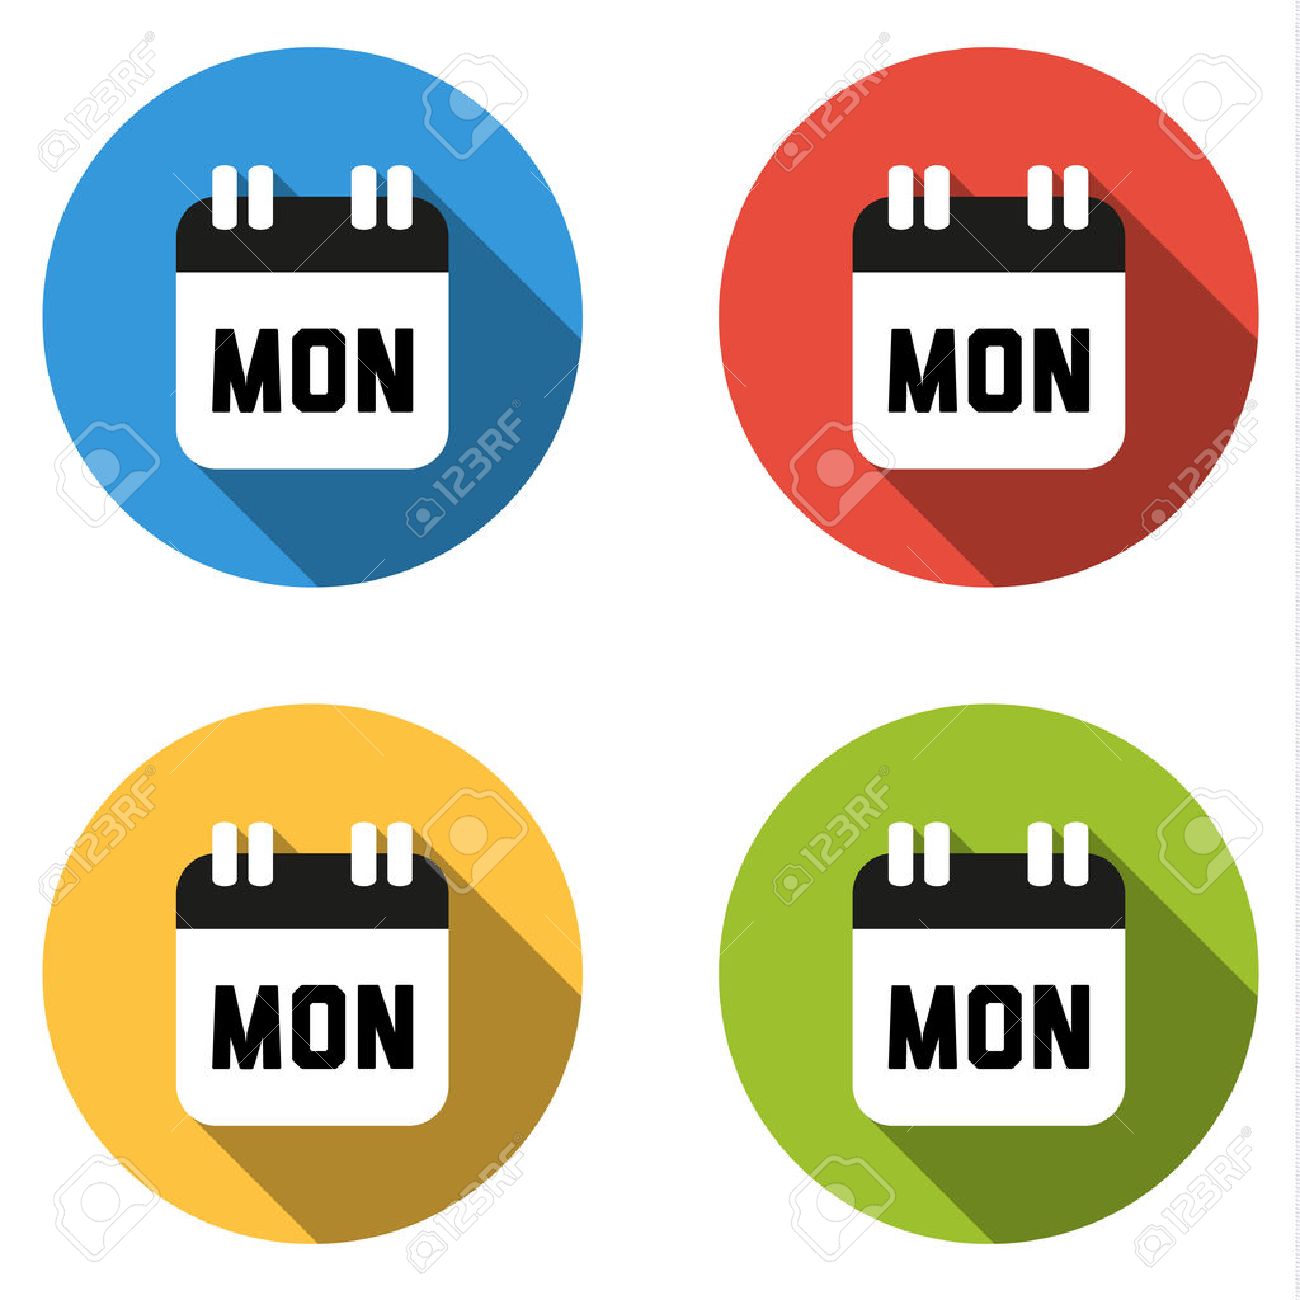 CYBER MONDAY ICON Stock image and royalty-free vector files on 